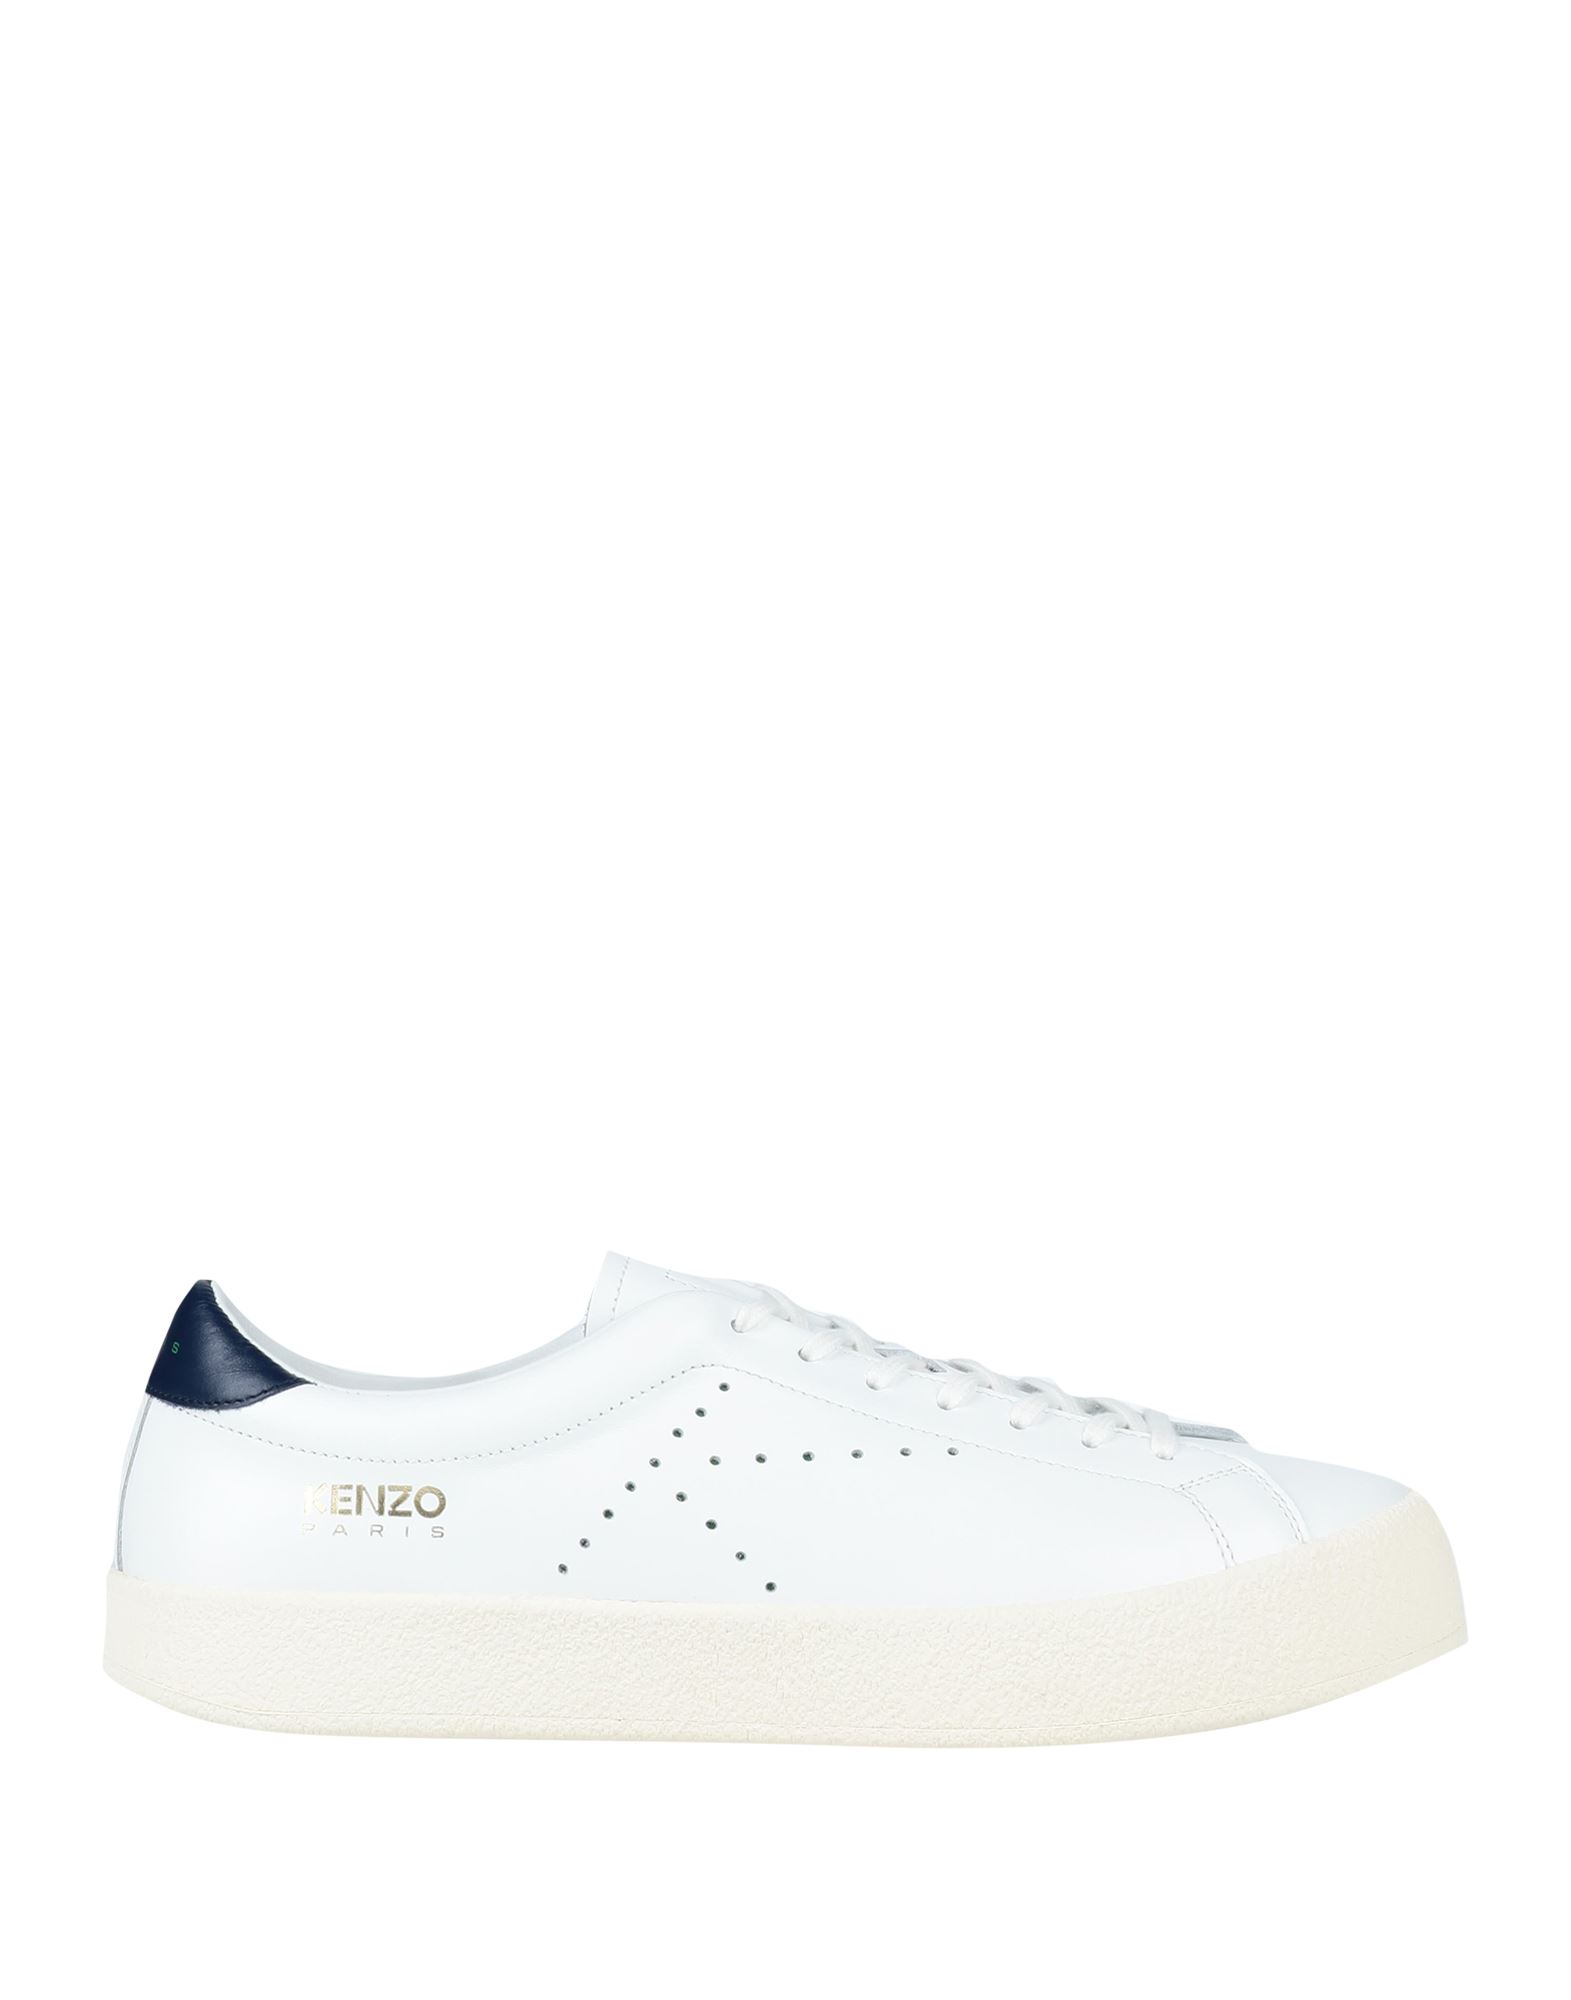 Shop Kenzo Man Sneakers White Size 8 Soft Leather